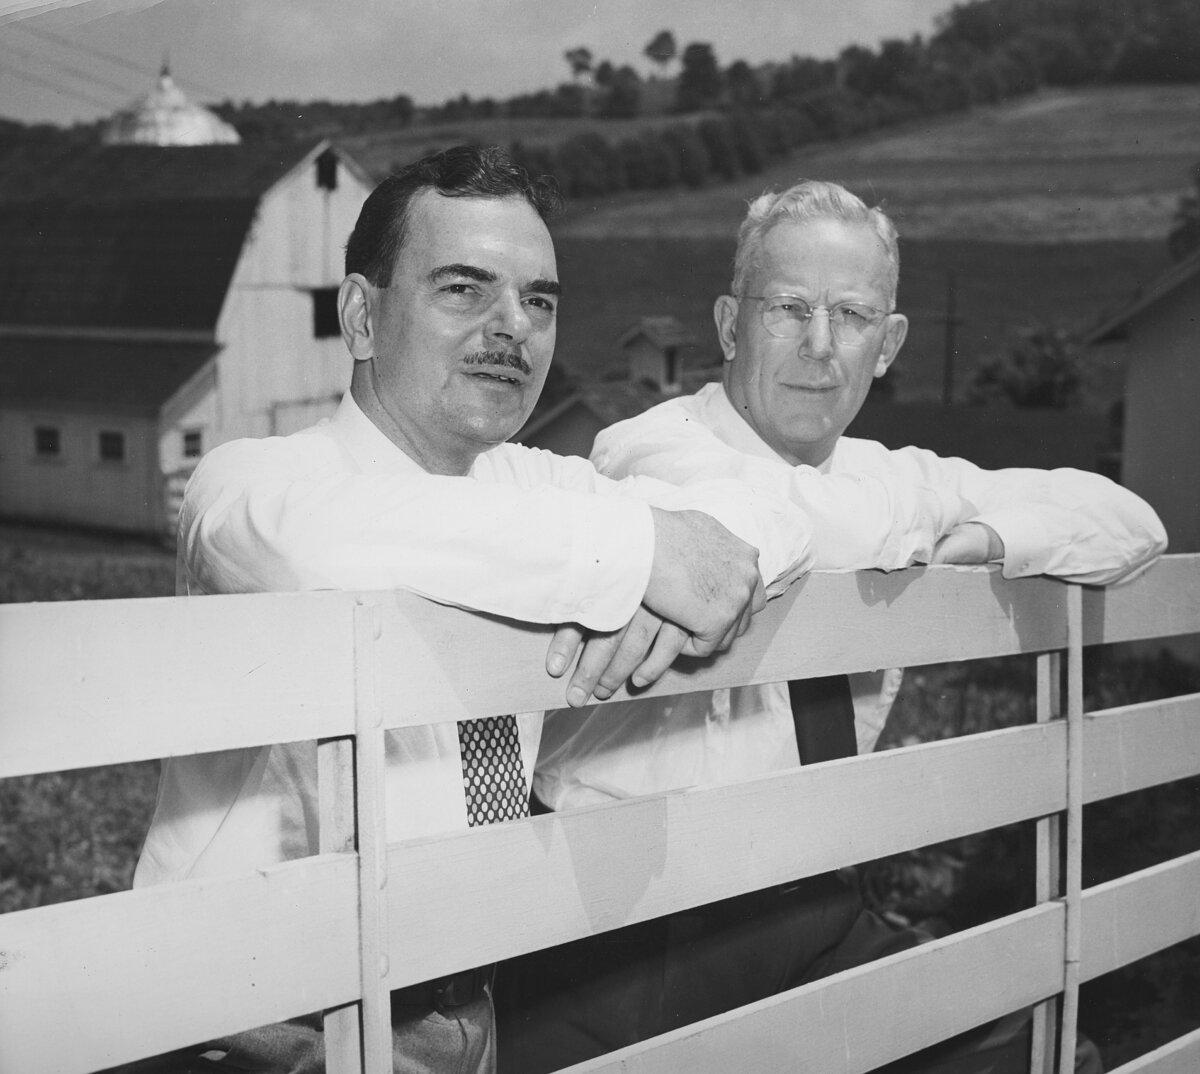 New York Gov. and Republican presidential candidate Thomas E. Dewey (L) and his running mate California Gov. Earl Warren lean on a fence at Dewey's farm in Pawling, N.Y., on July 2, 1948. (Al Gretz/FPG/Getty Images)